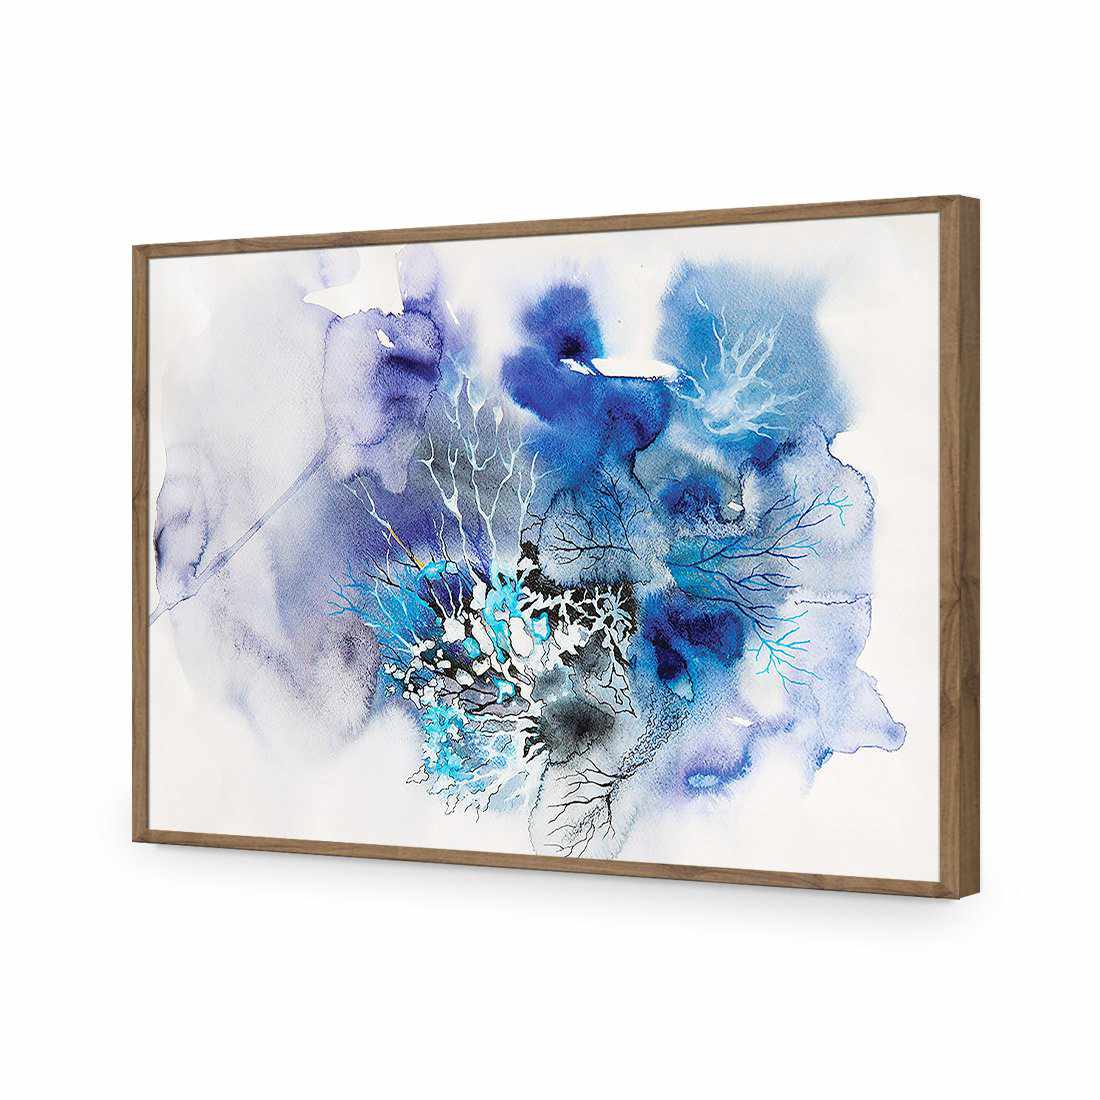 Veins Of Life, Blue-Acrylic-Wall Art Design-Without Border-Acrylic - Natural Frame-45x30cm-Wall Art Designs